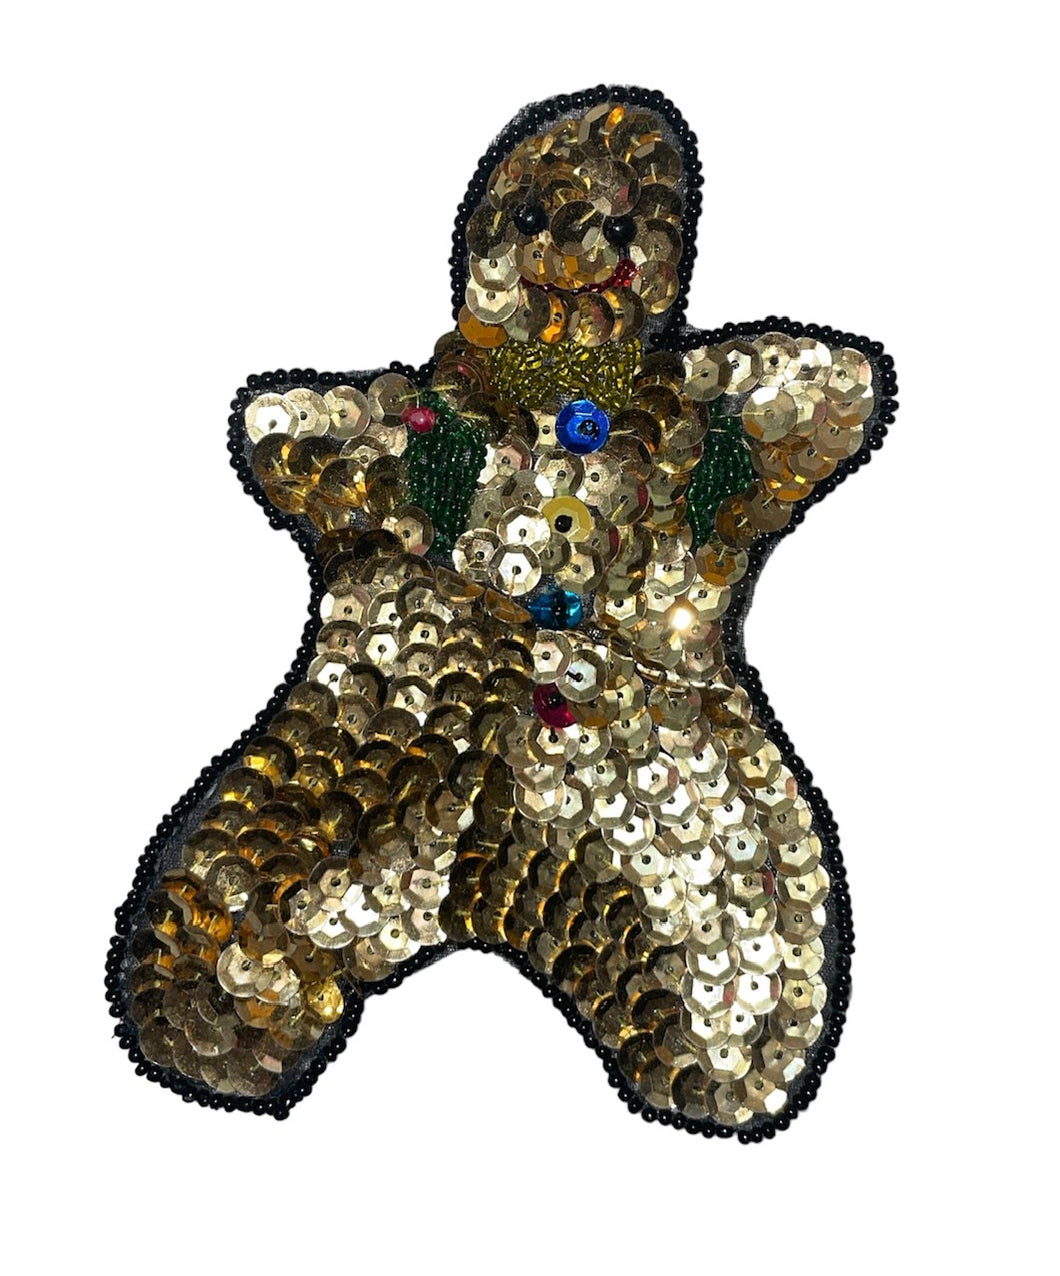 Ginger Bread Man with Gold Sequins and Beads 5